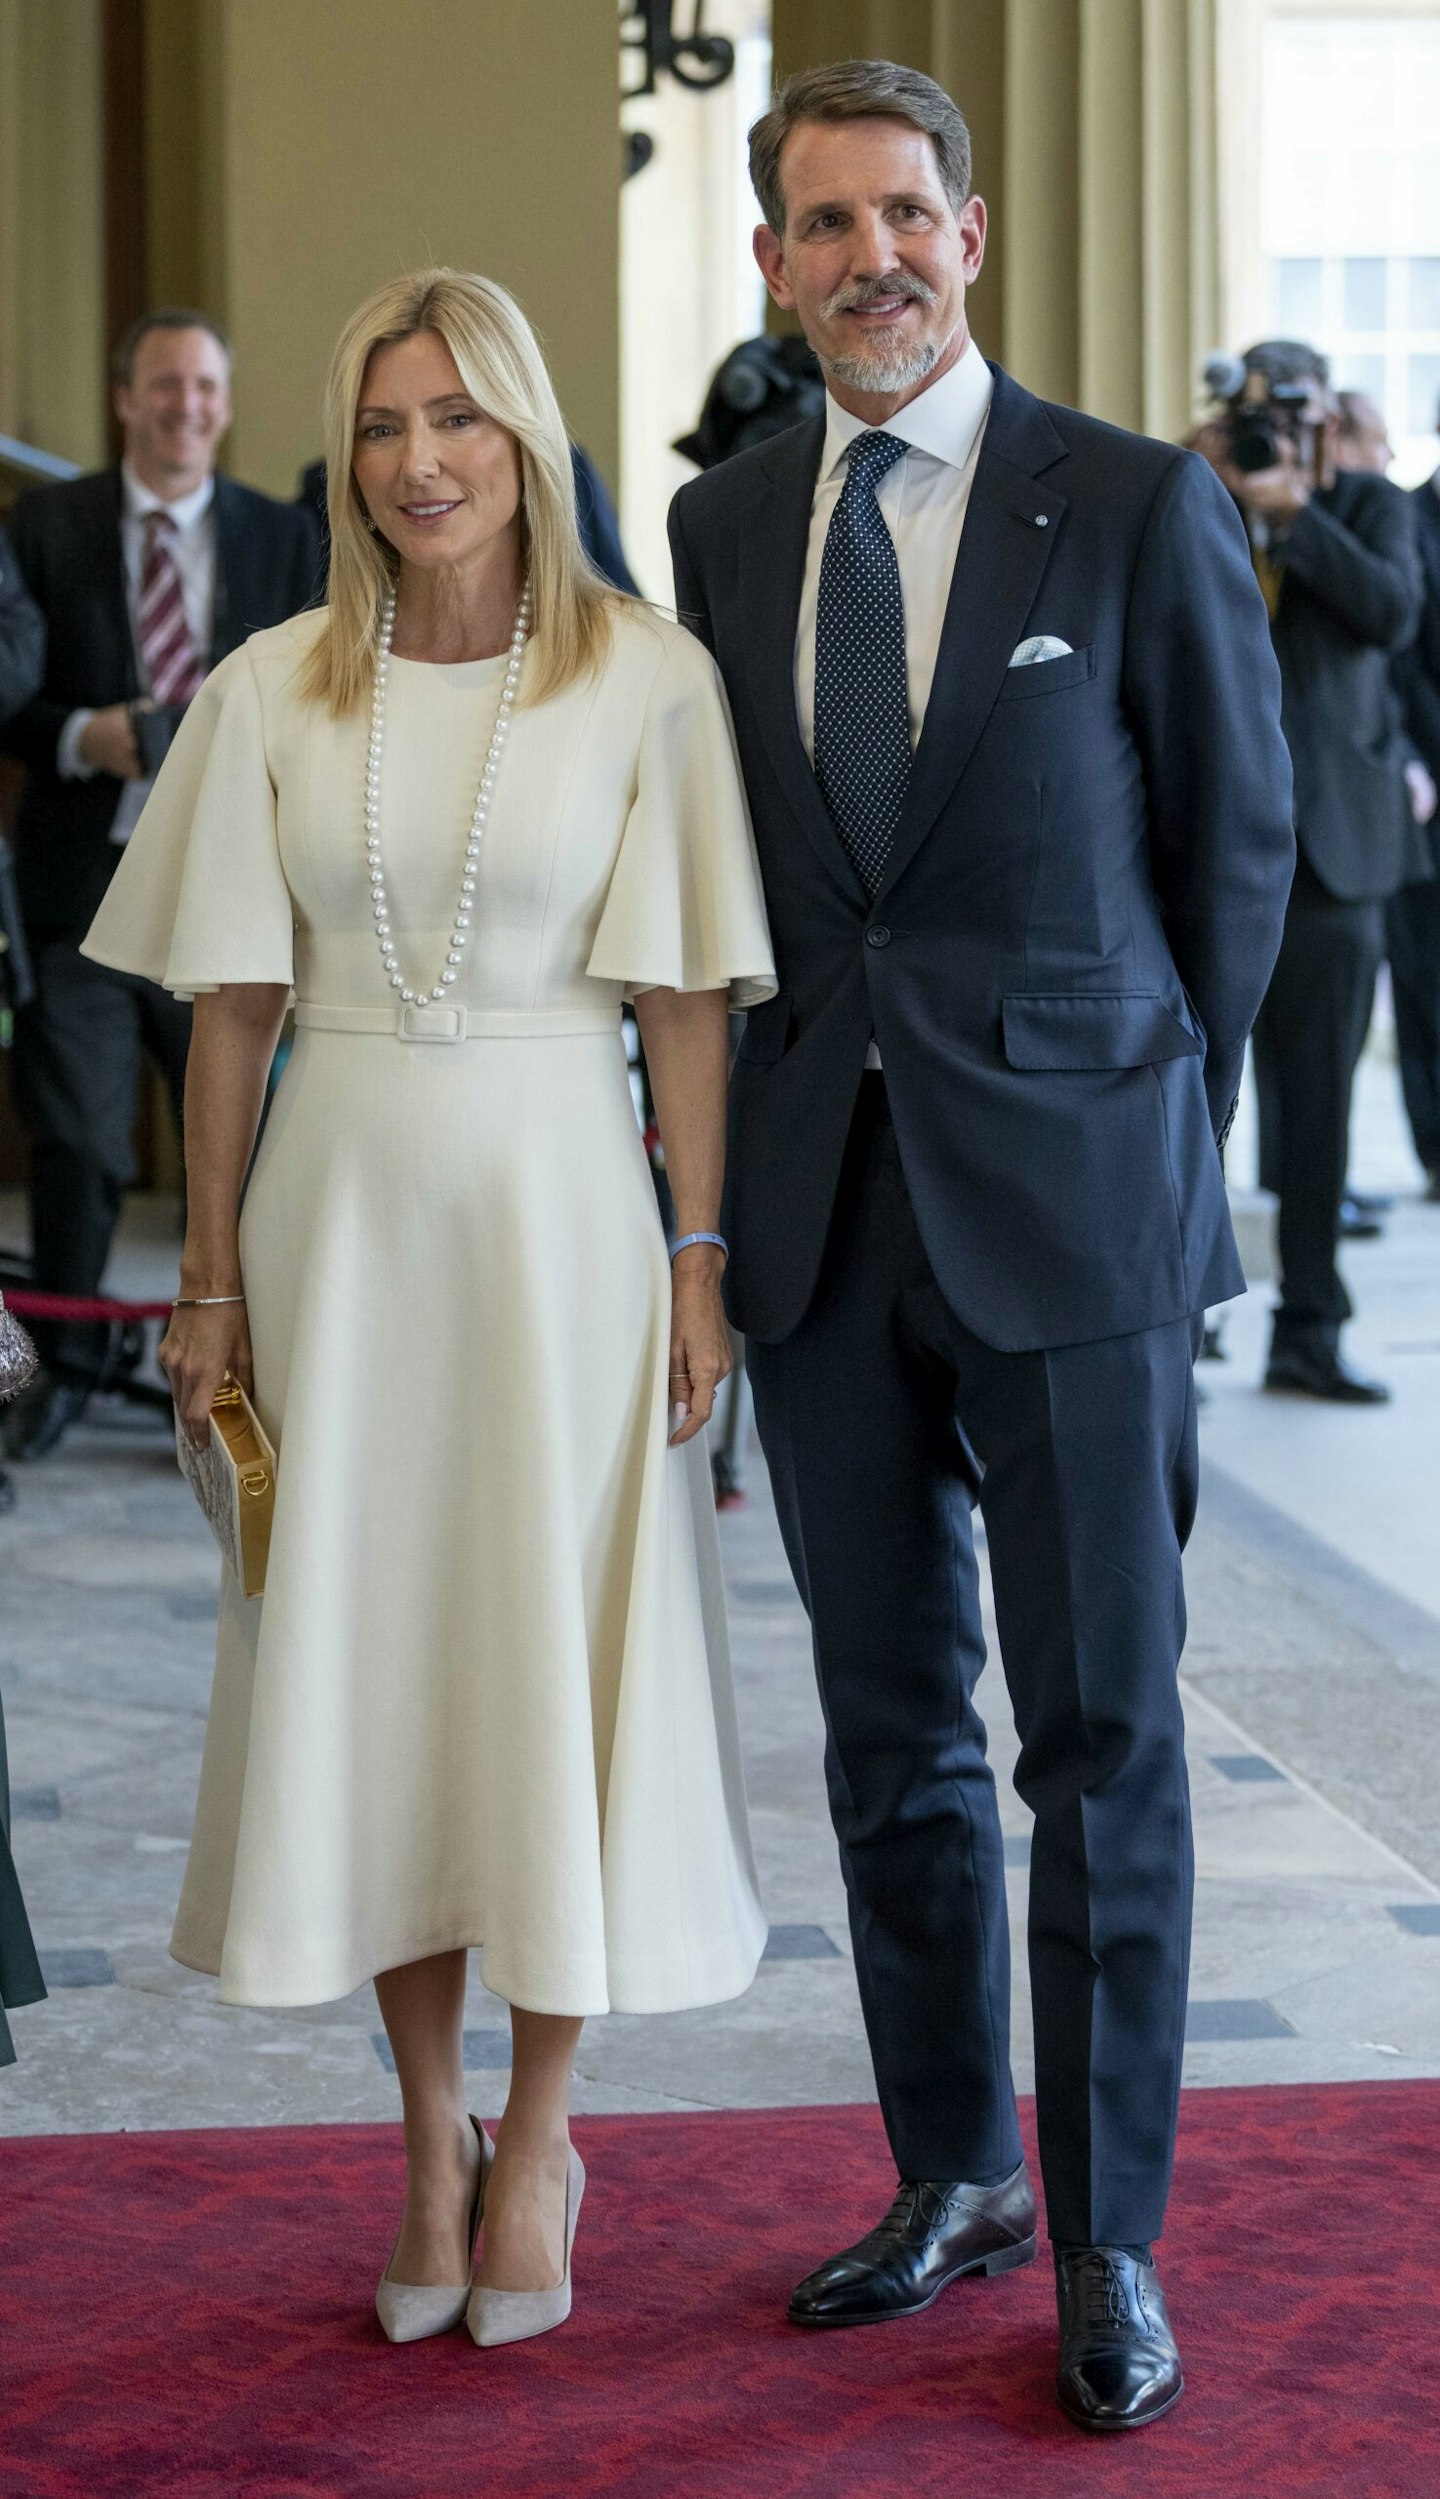 Marie-Chantal, Crown Princess of Greece and Pavlos, Crown Prince of Greece attend the Coronation Reception for overseas guests